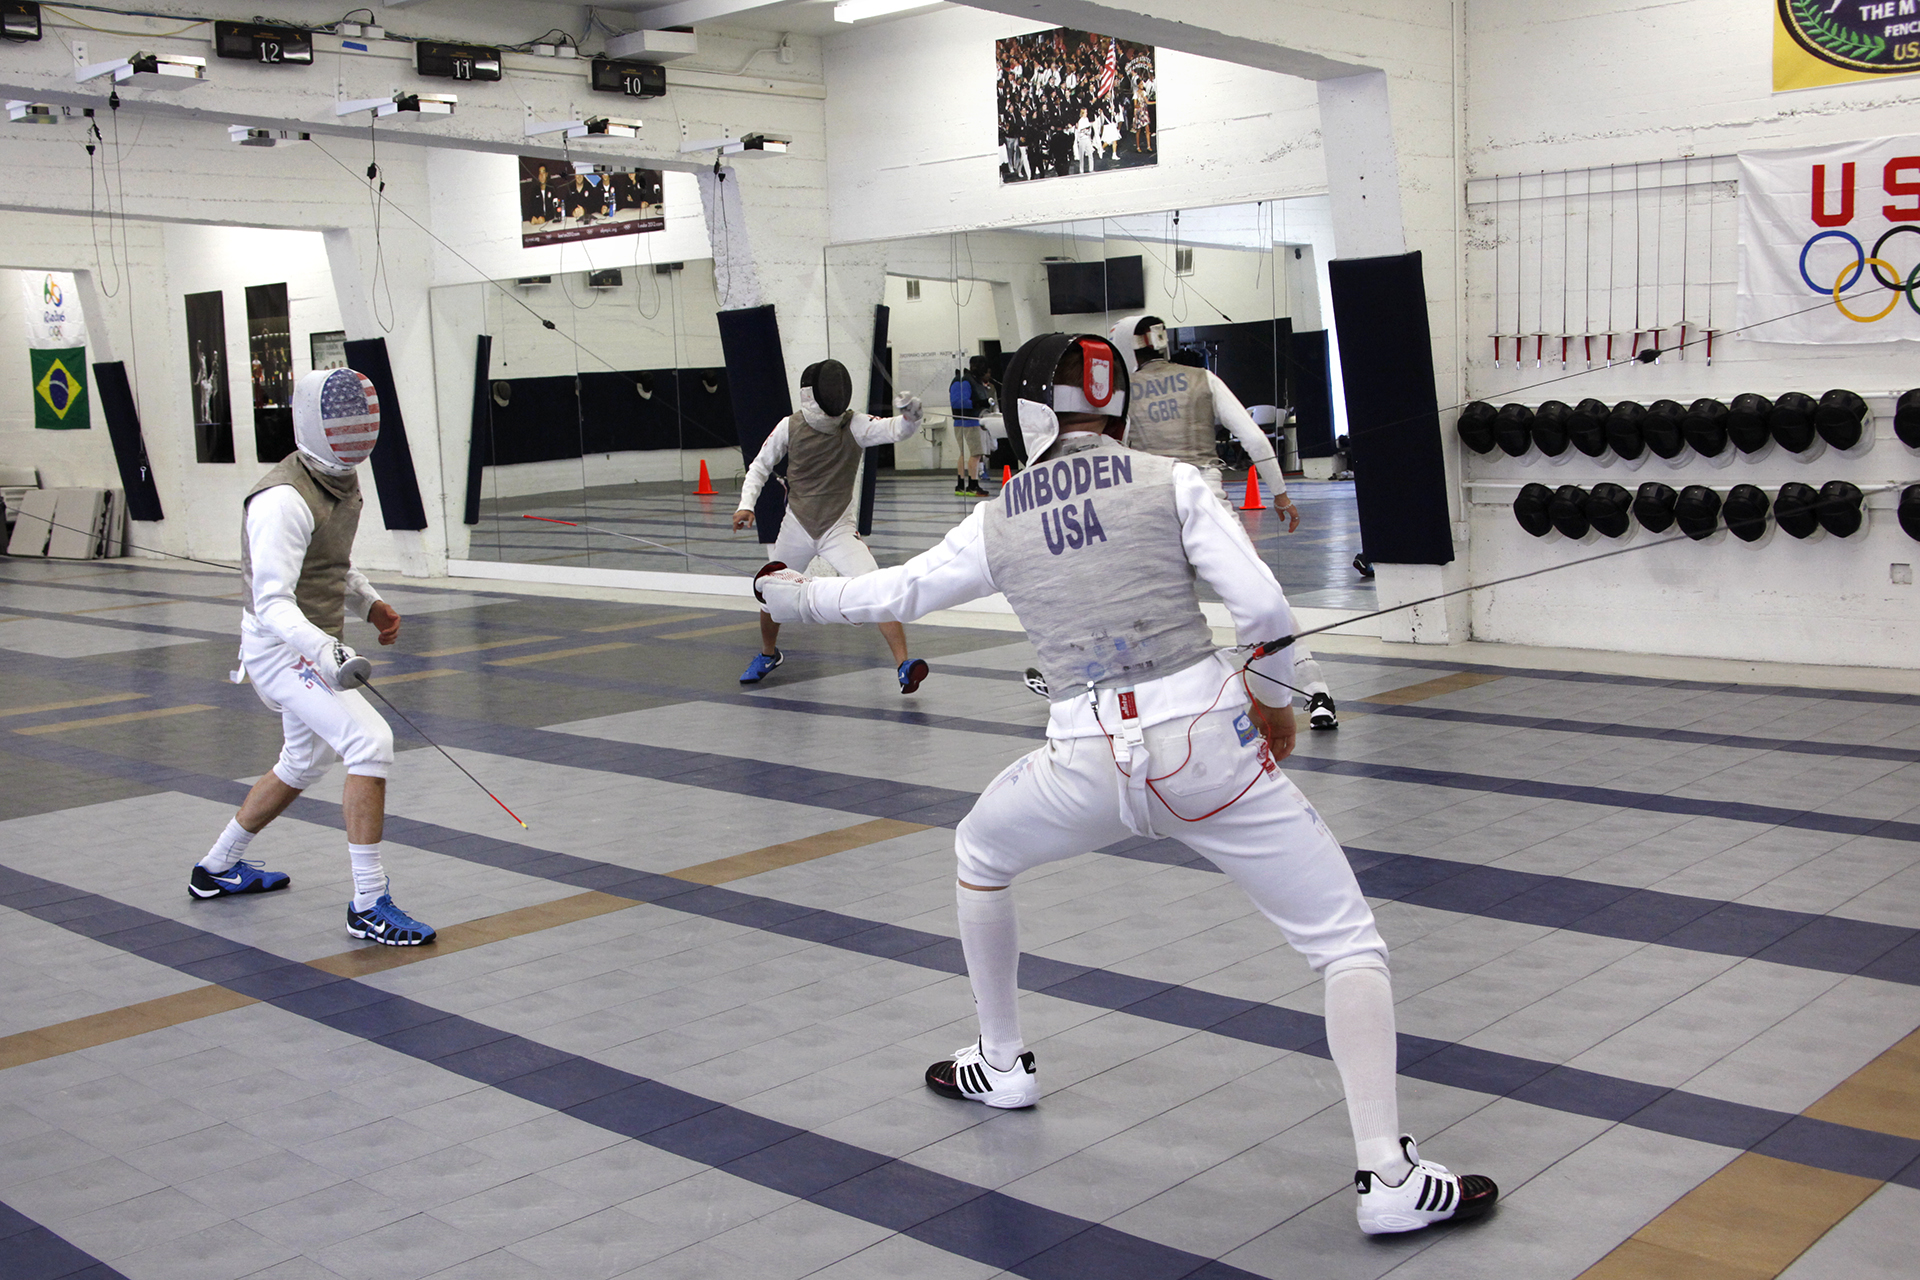 U.S. National fencing team athletes Gerek Meinhardt (left) and Race Imboden (right) practice their fencing techniques. Both will be heading to Rio to compete in the 2016 Olympics.